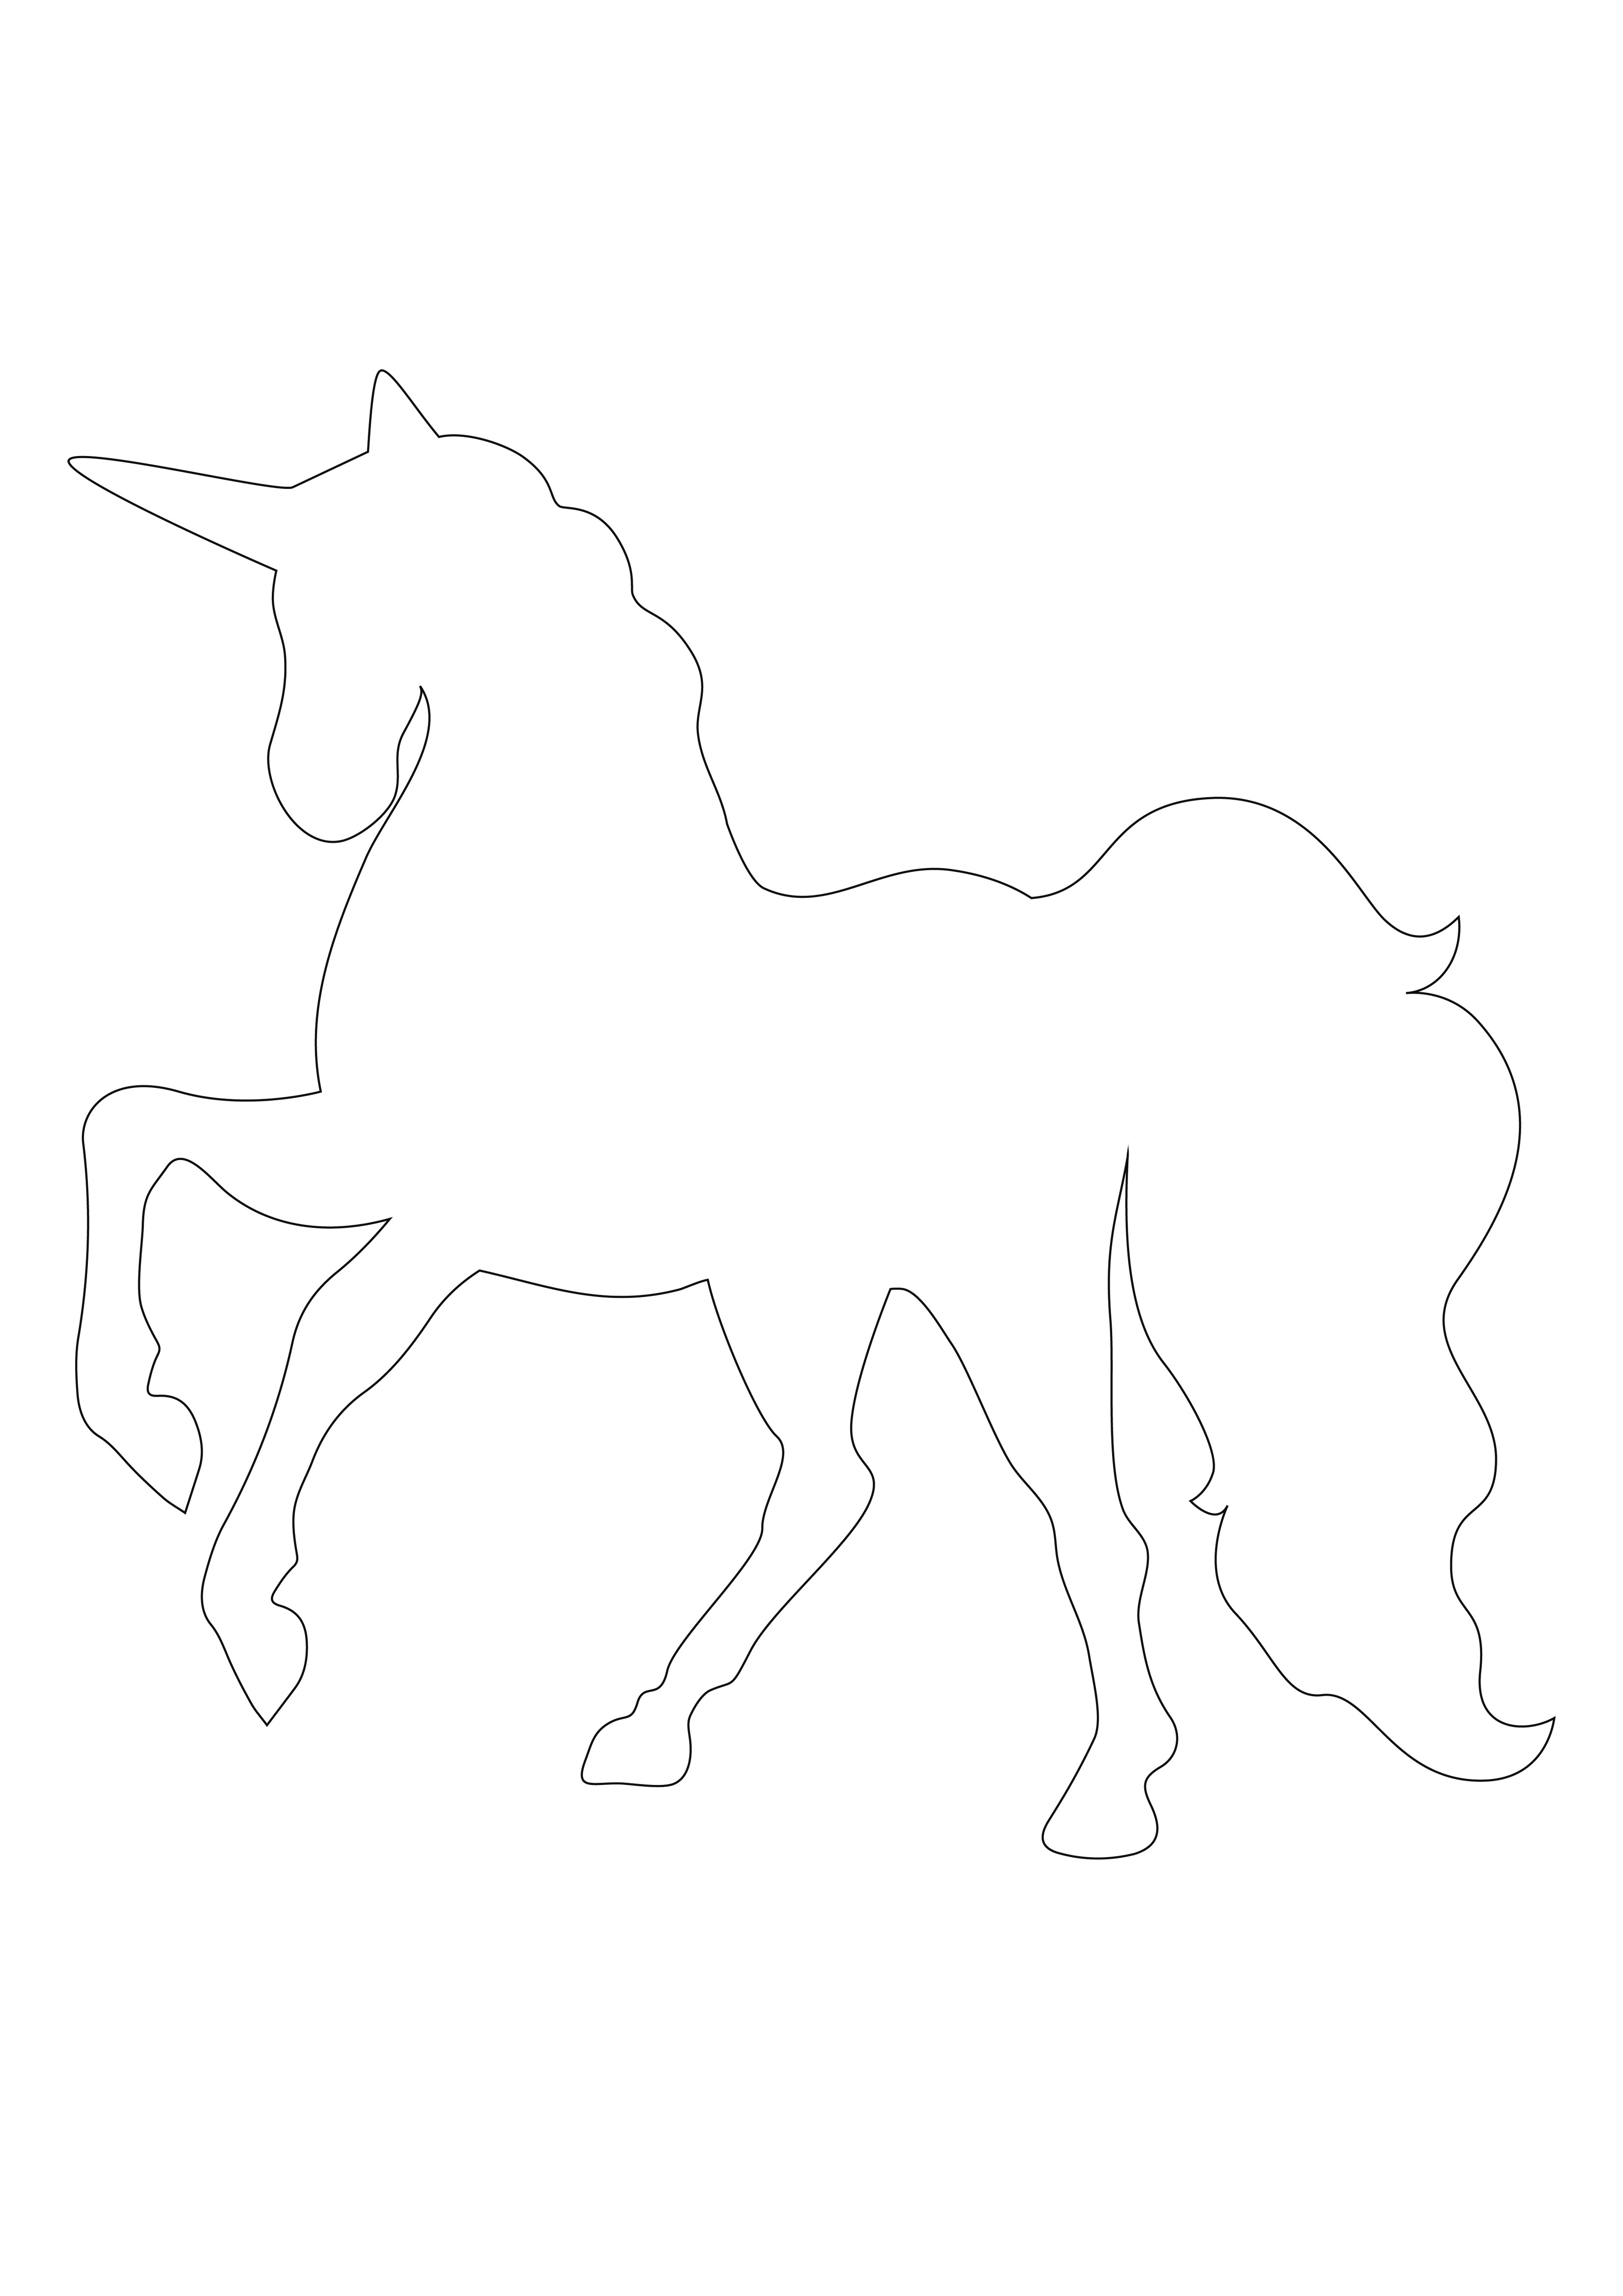 Unicorn pattern to color for free and easy to create personalized unicorns